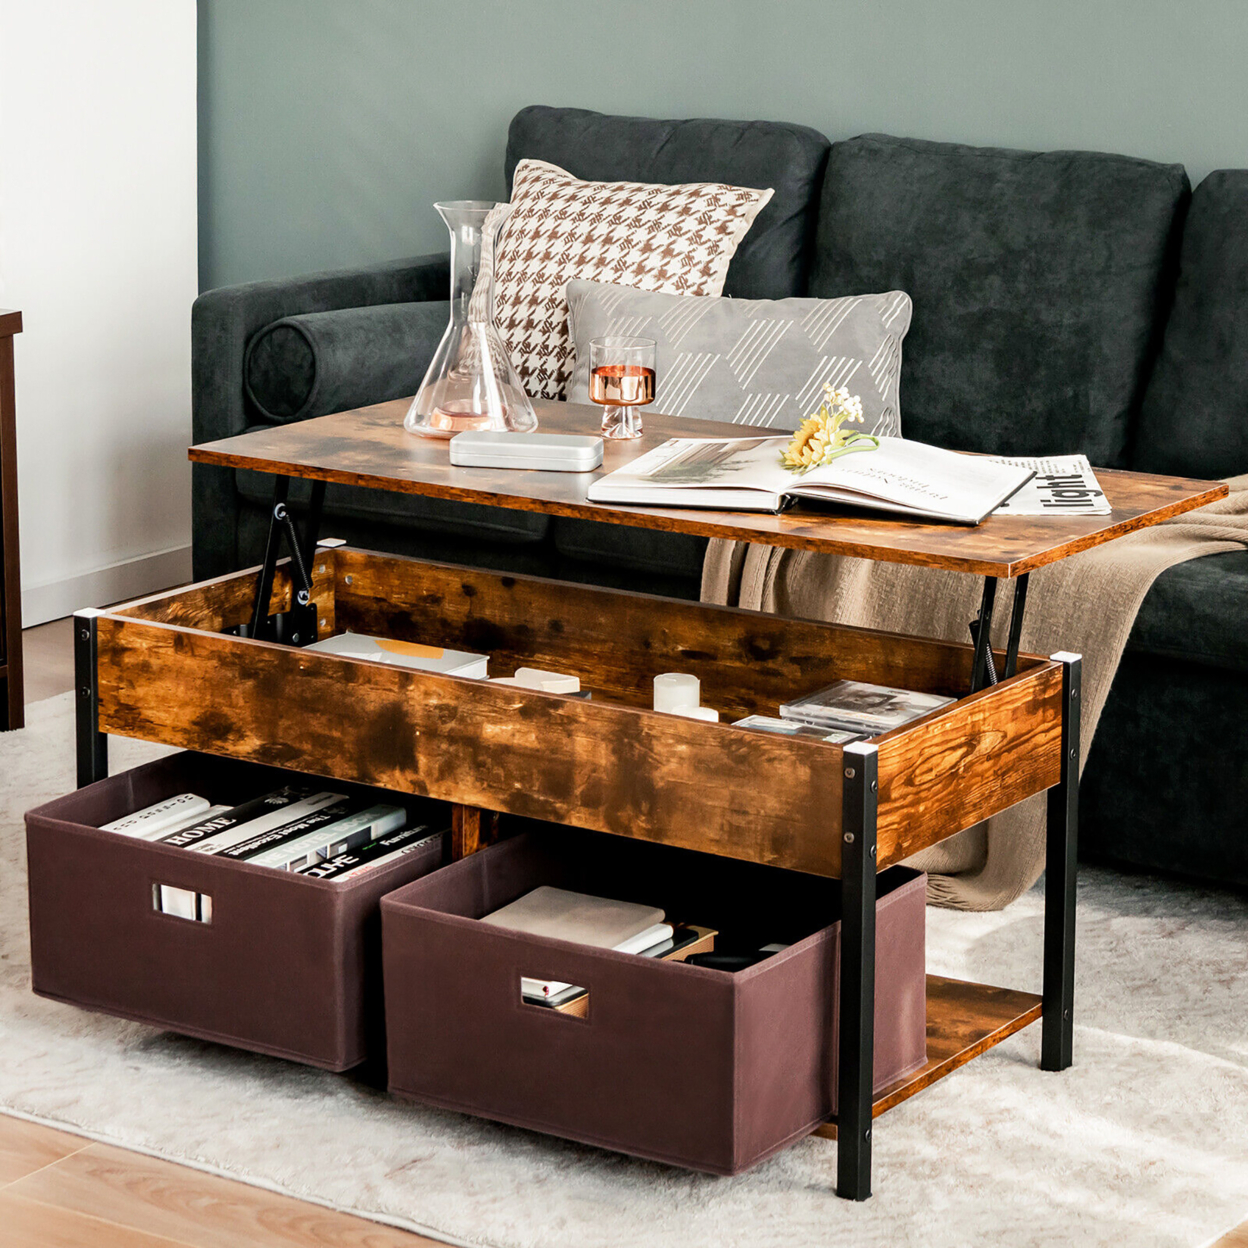 Lift Top Coffee Table Multifunctional Pop-up Central Table With Lifting Tabletop - Rustic Brown